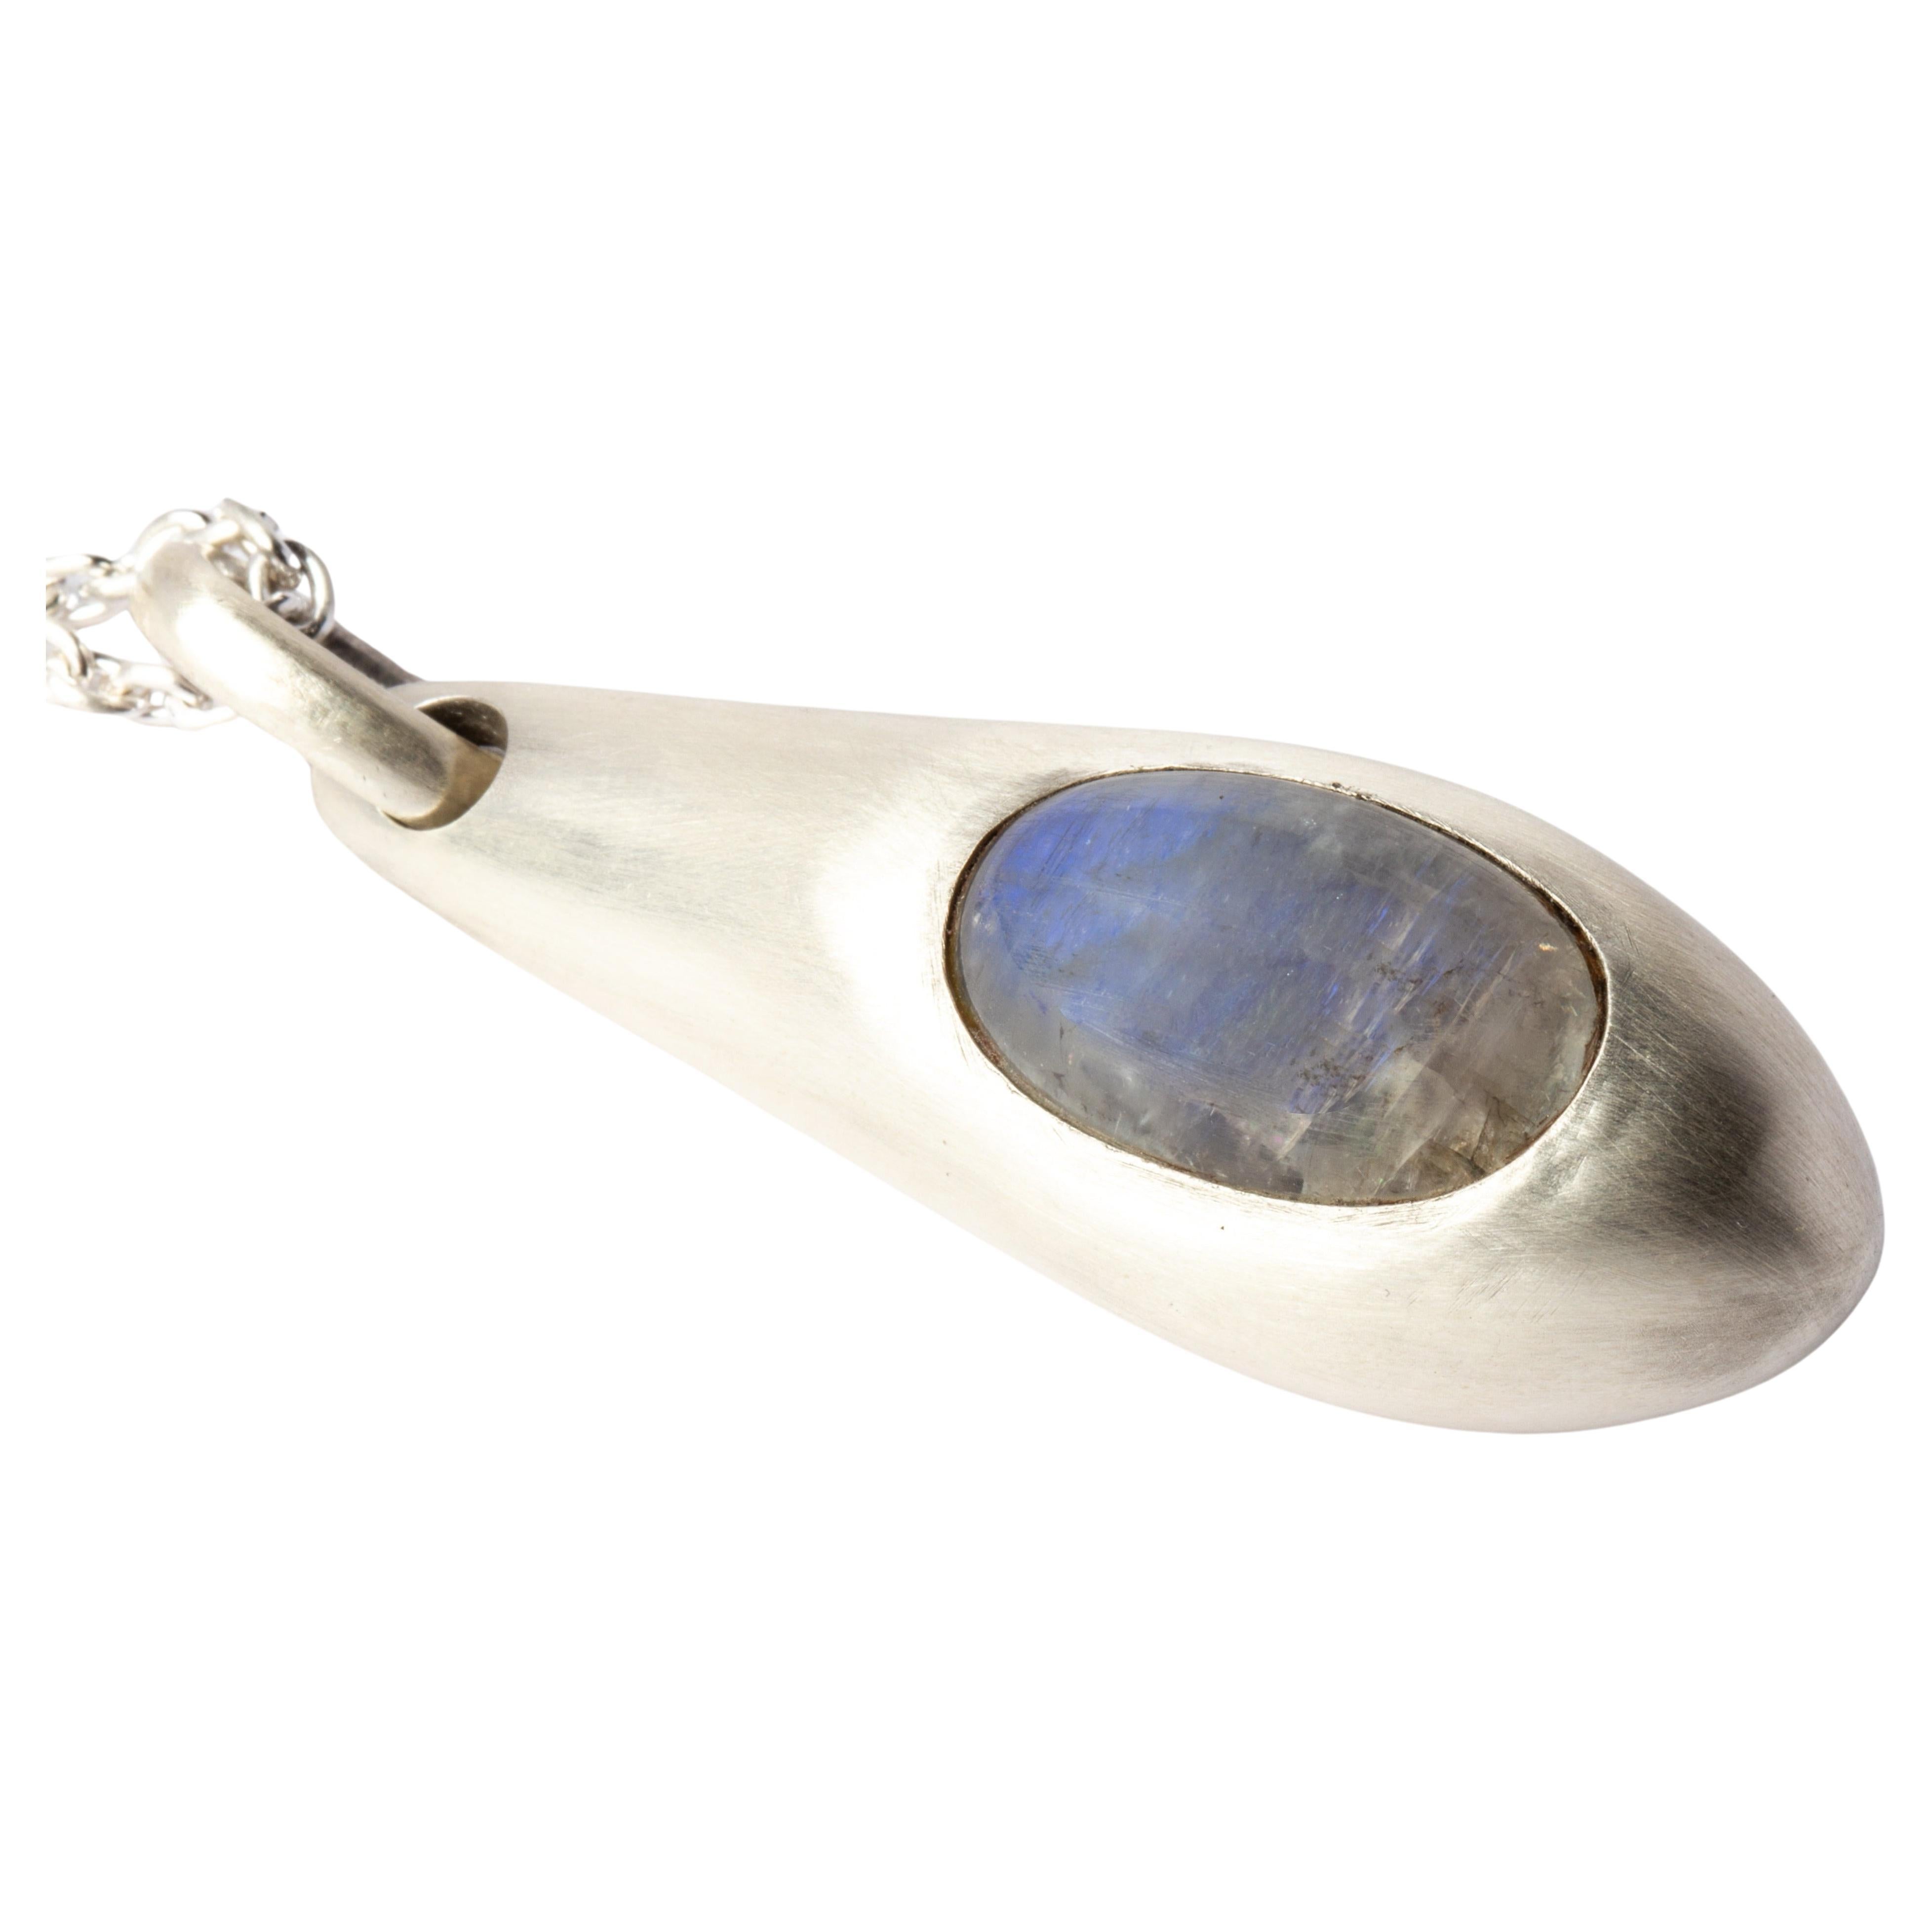 Chrysalis Necklace (Cremaster Emergence, Rainbow Moonstone, MA+RMS) For Sale